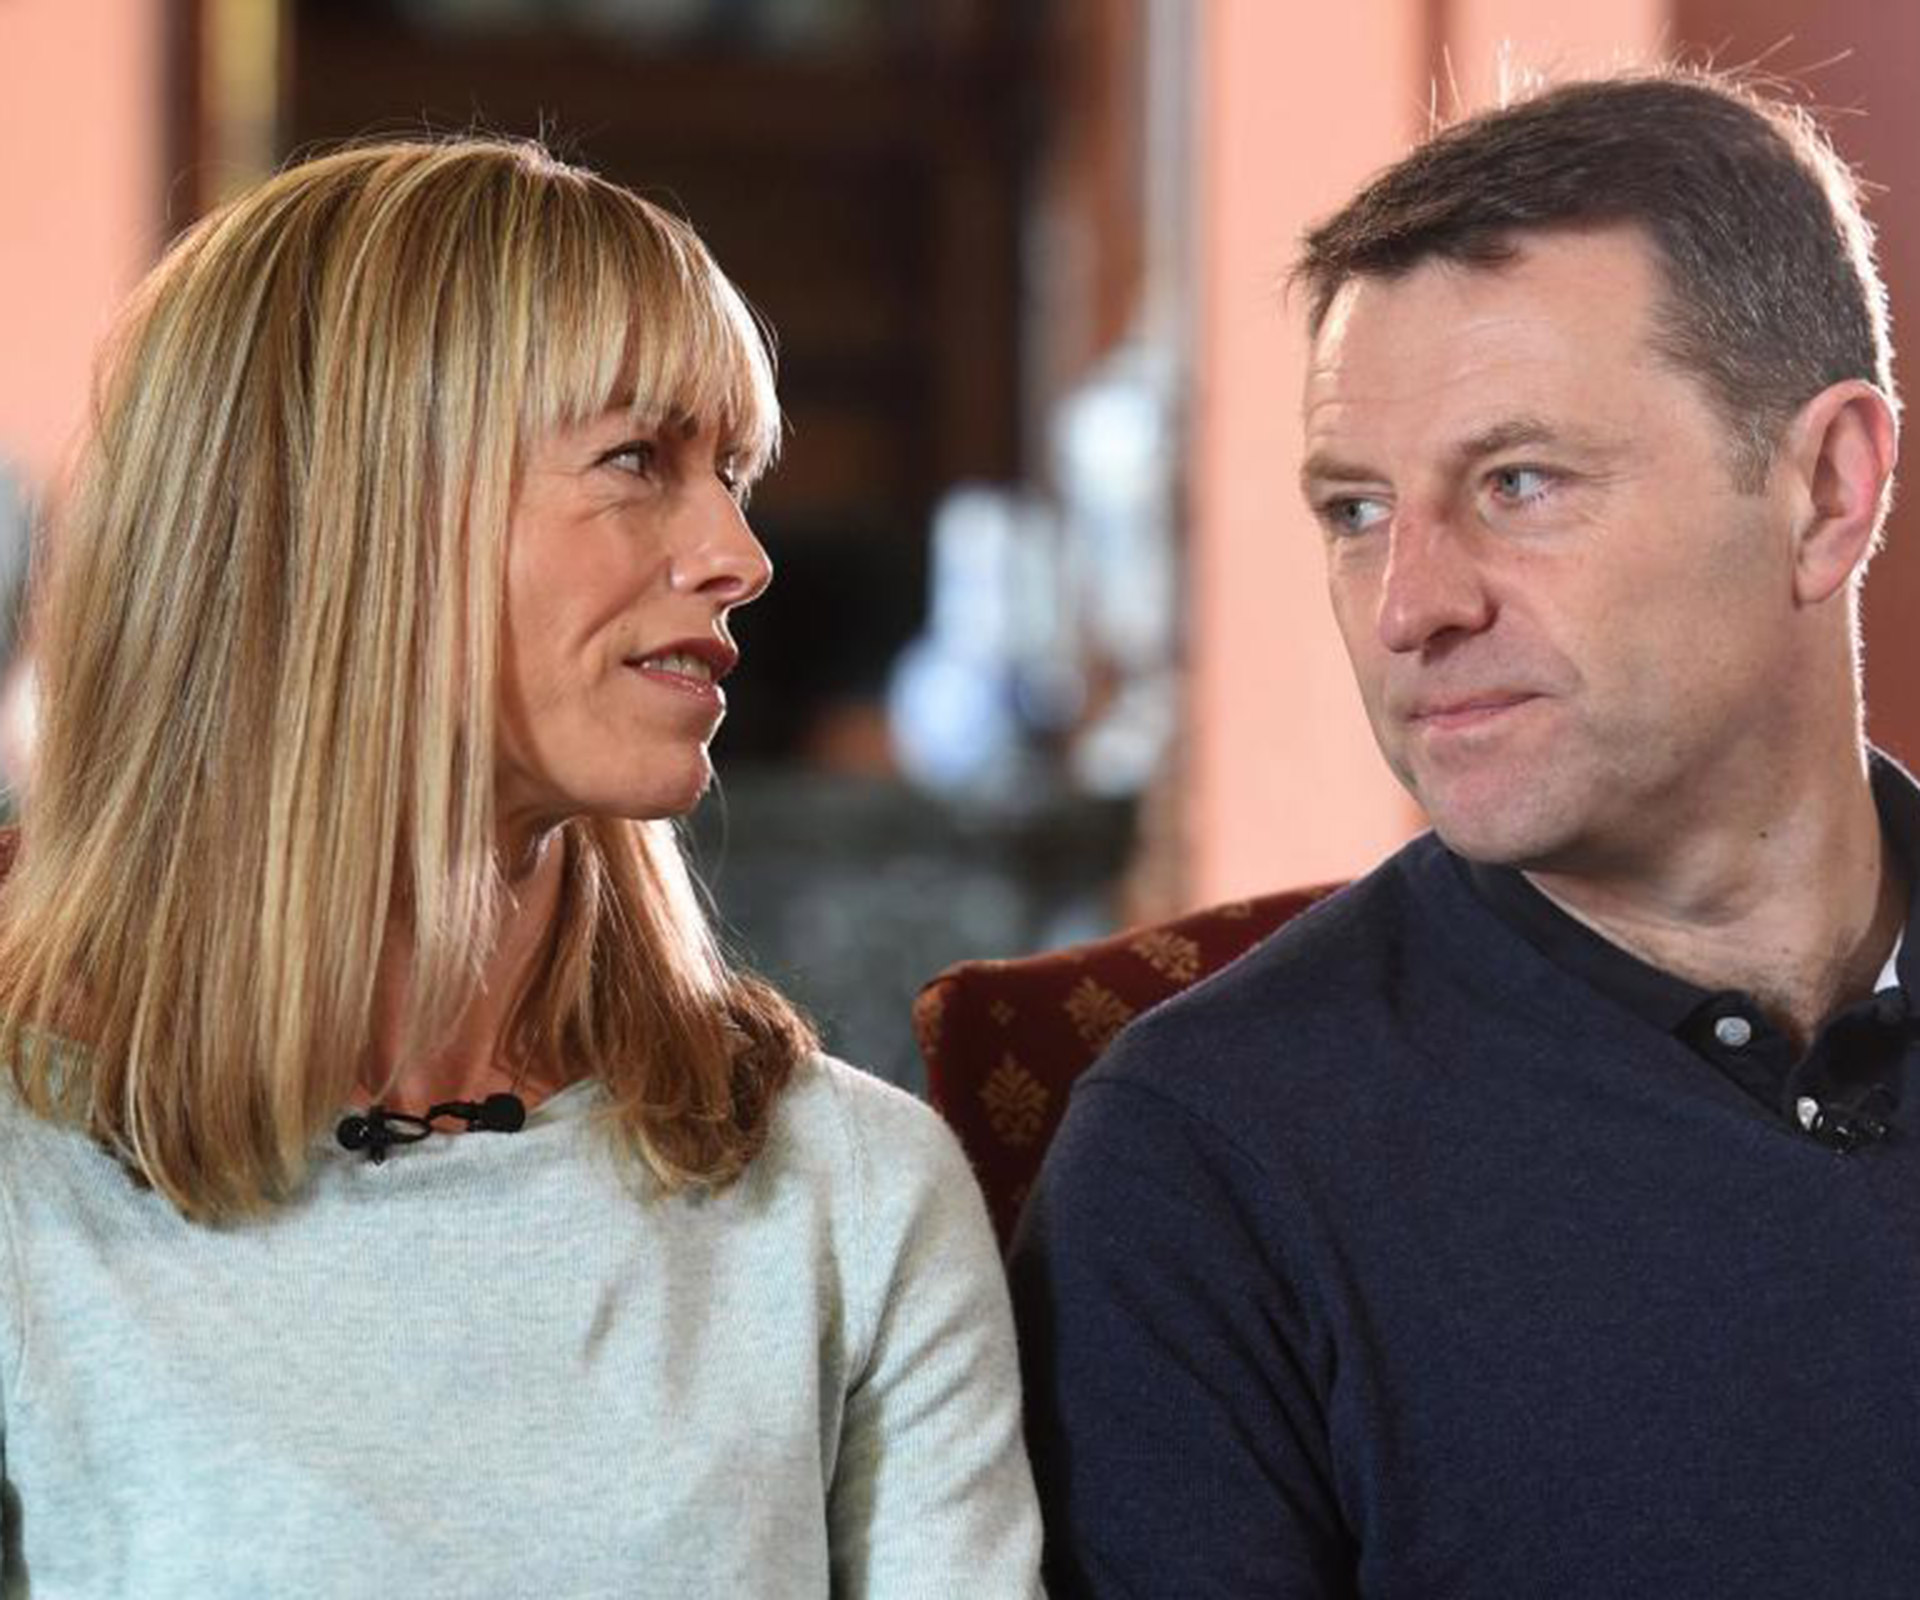 “10 years without Madeleine” – Kate and Gerry McCann give devastating interview to the BBC